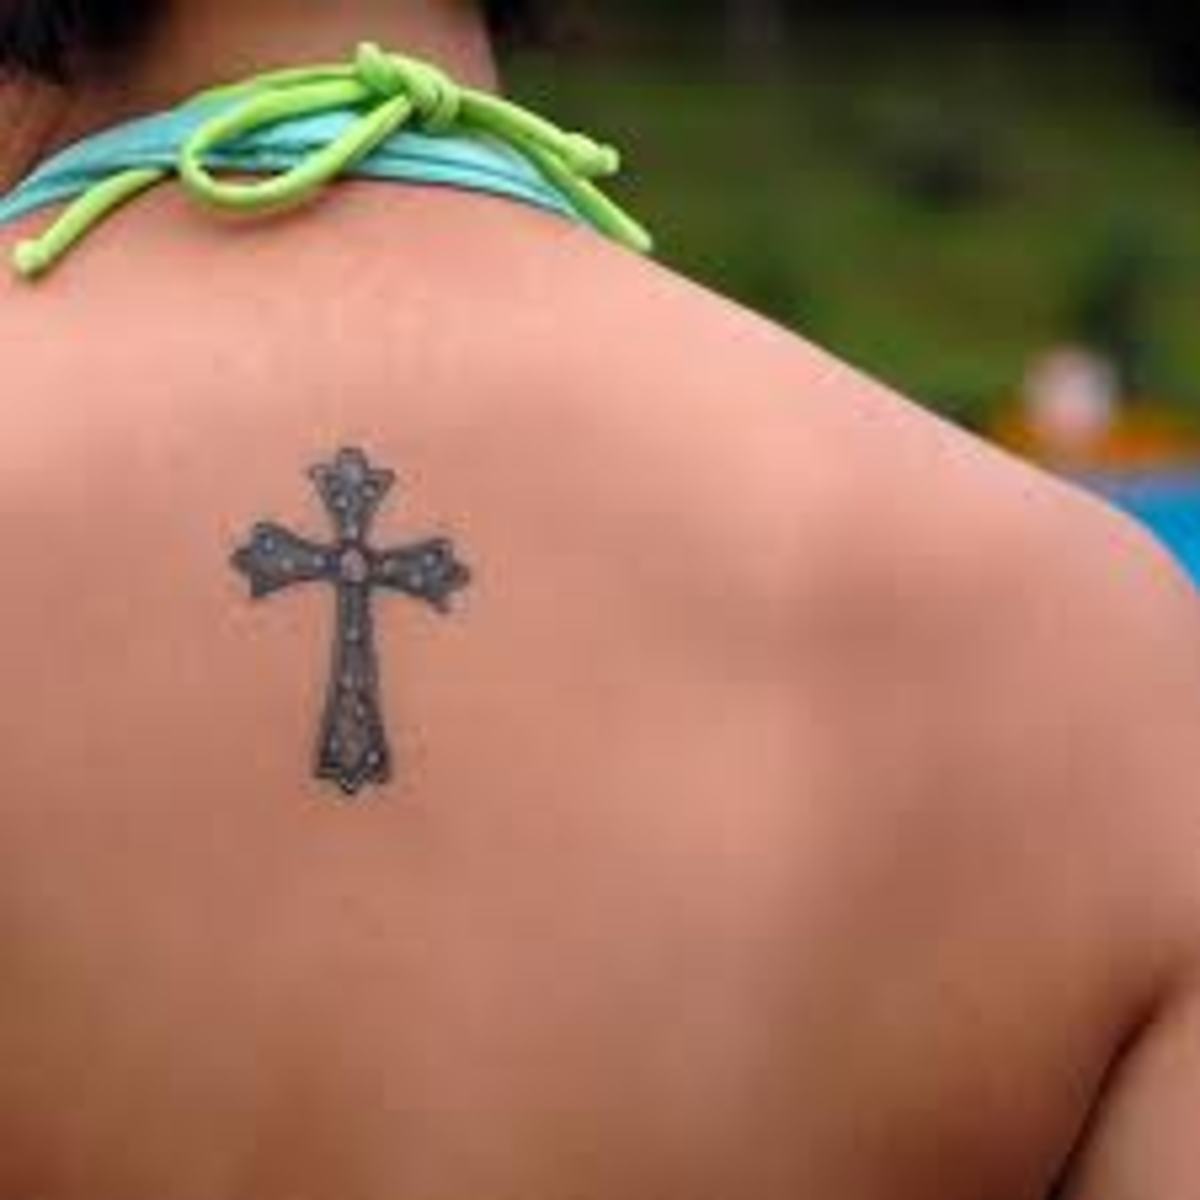 cross-tattoos-angel-tattoos-and-religious-tattoos-cross-choices-and-symbolic-meanings